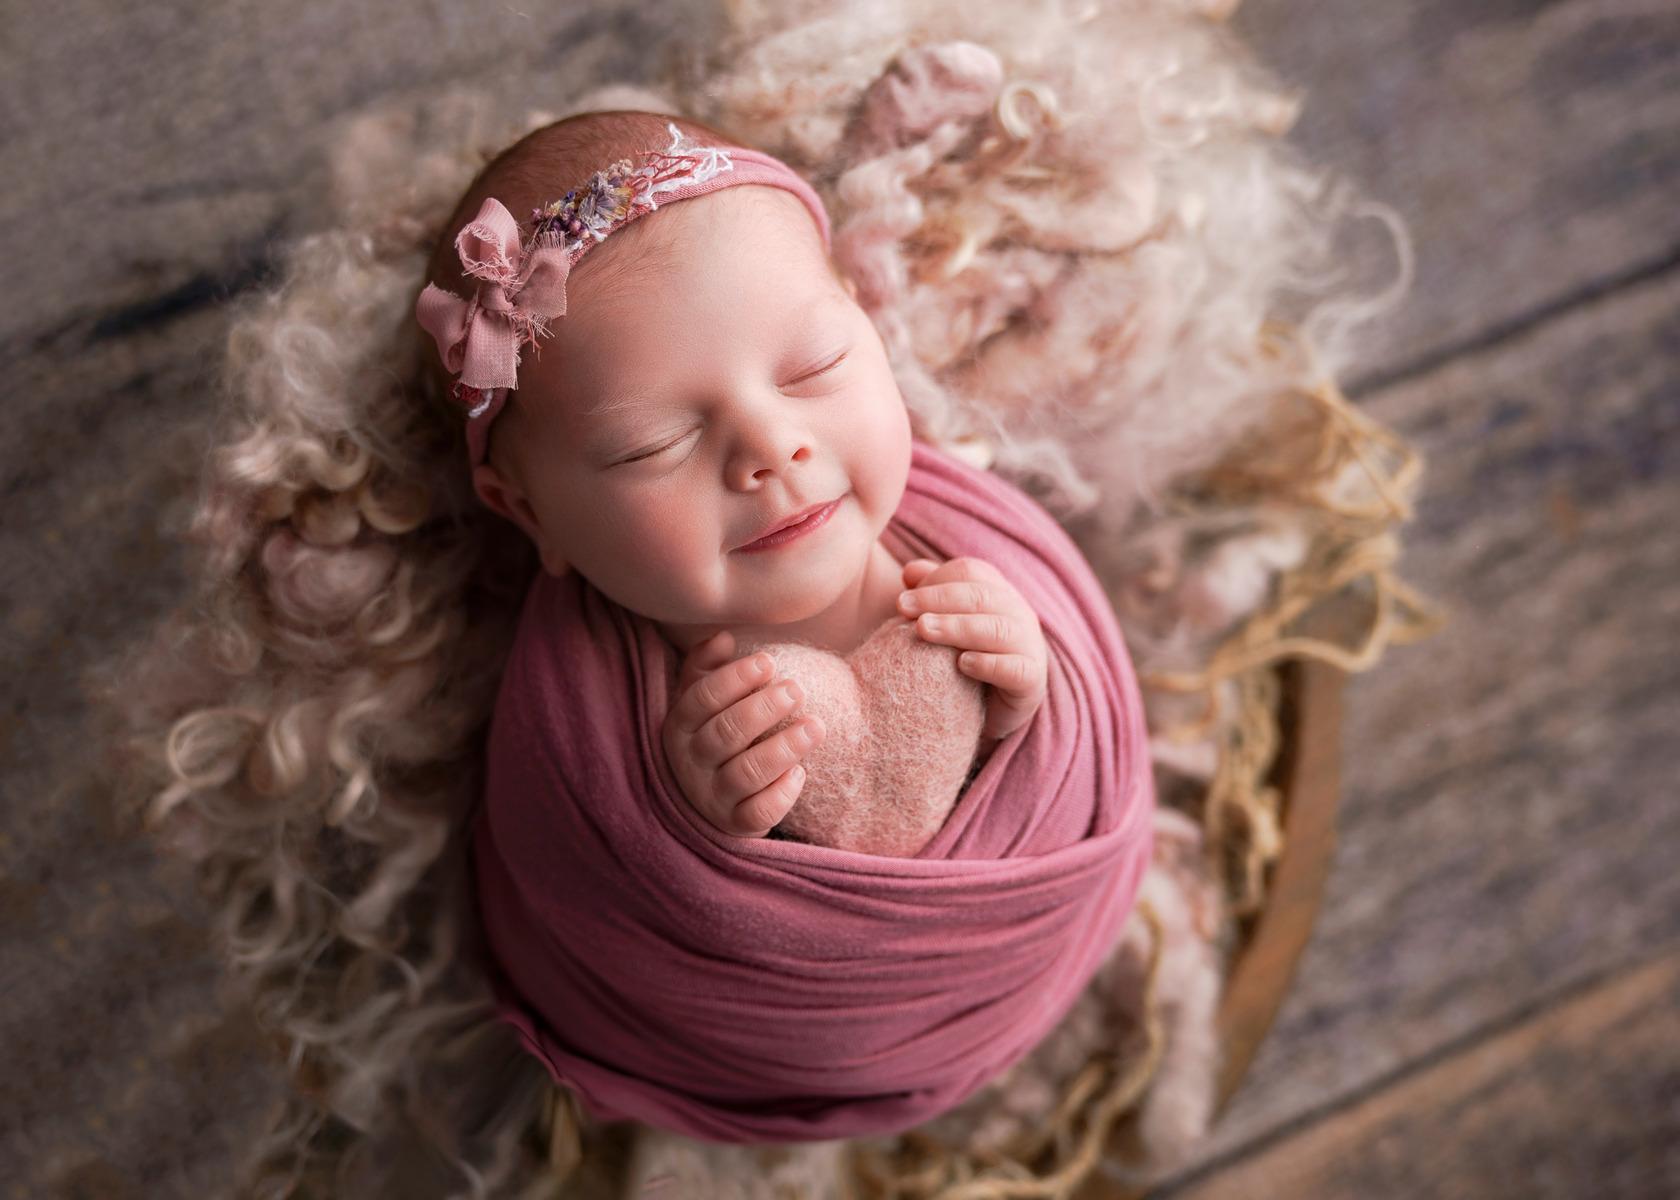 "Adorable baby girl wrapped in pink holding a heart prop, wearing a cute pink headband, photographed by Ceire Rhein, Dublin's newborn photographer."